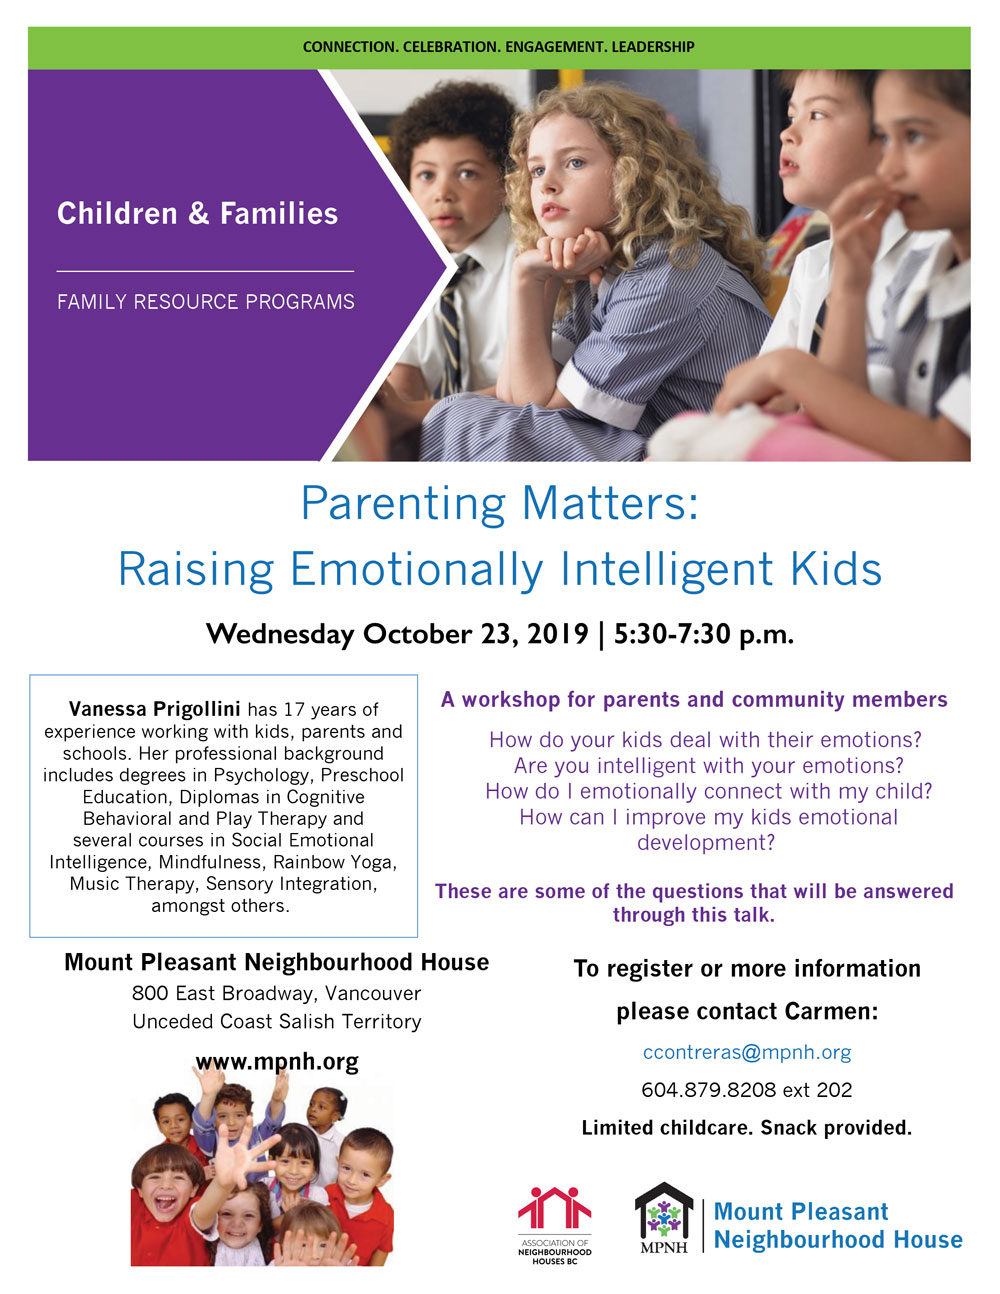 An image of the poster with event details, featuring photos of children learning, listening, and playing together.